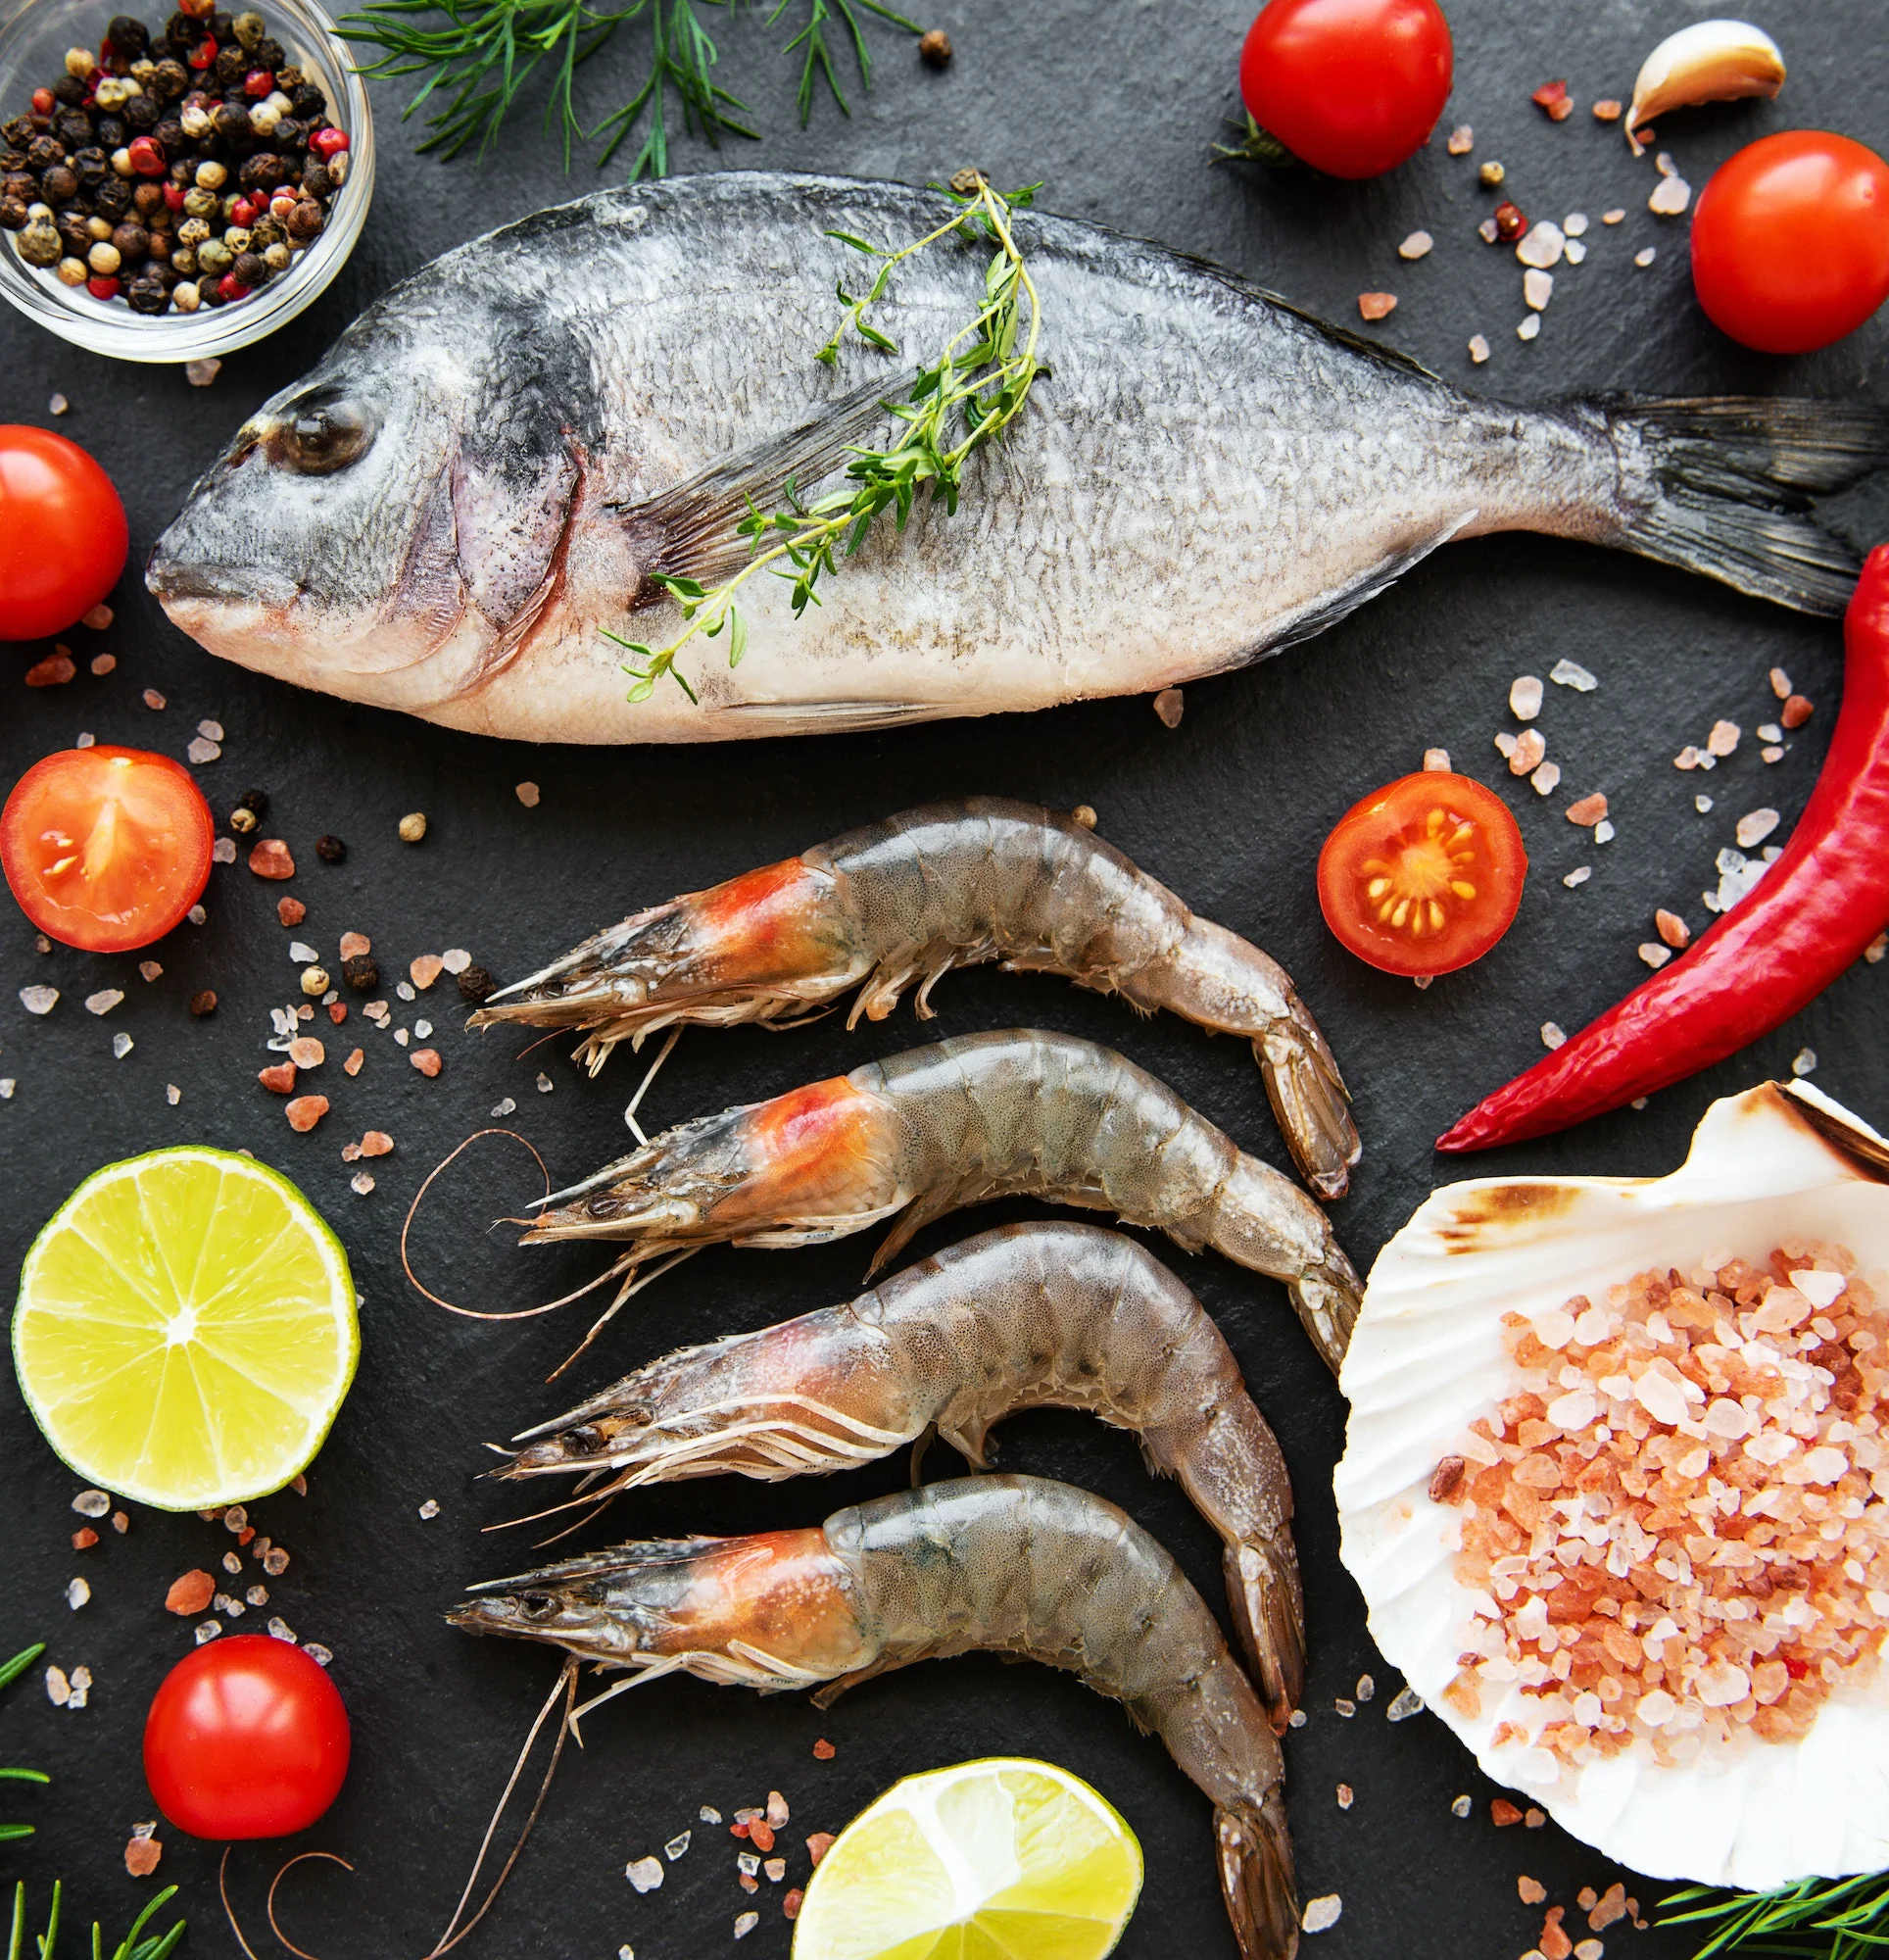 Can You Eat Fish on Vegan Diet and Still Enjoy Meals?
